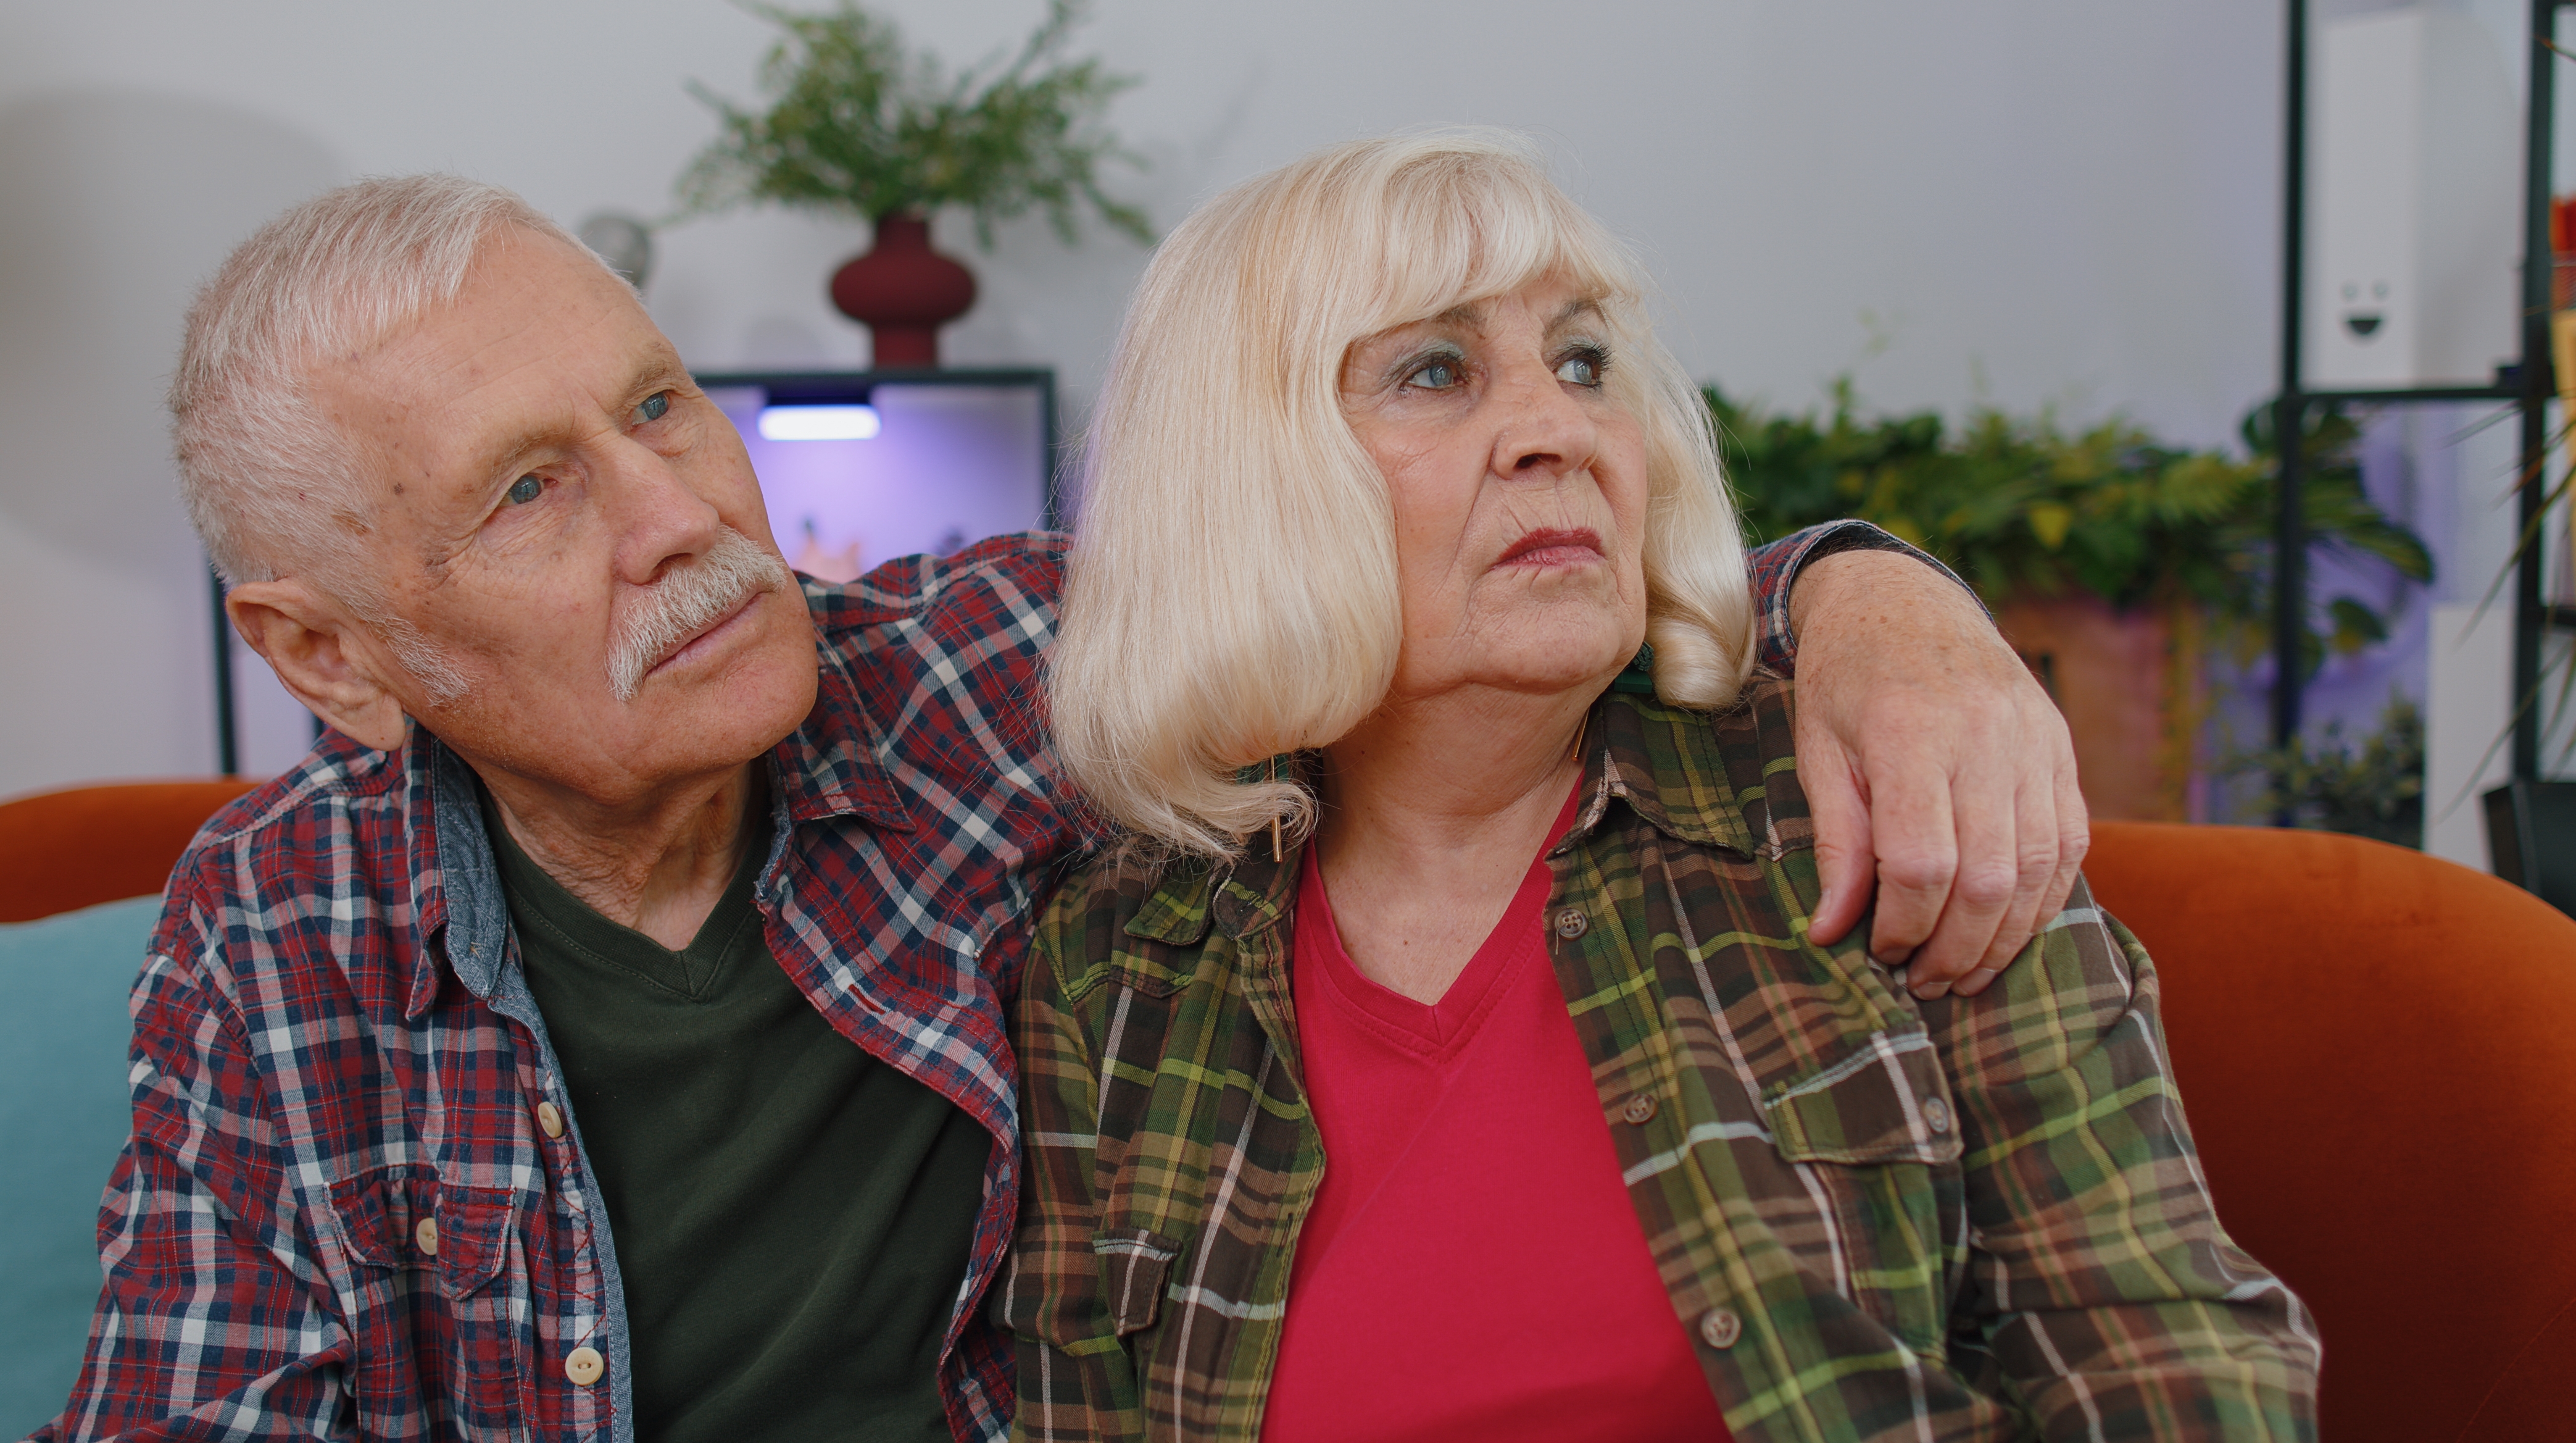 Annoyed grandparents sitting at home | Source: Shutterstock